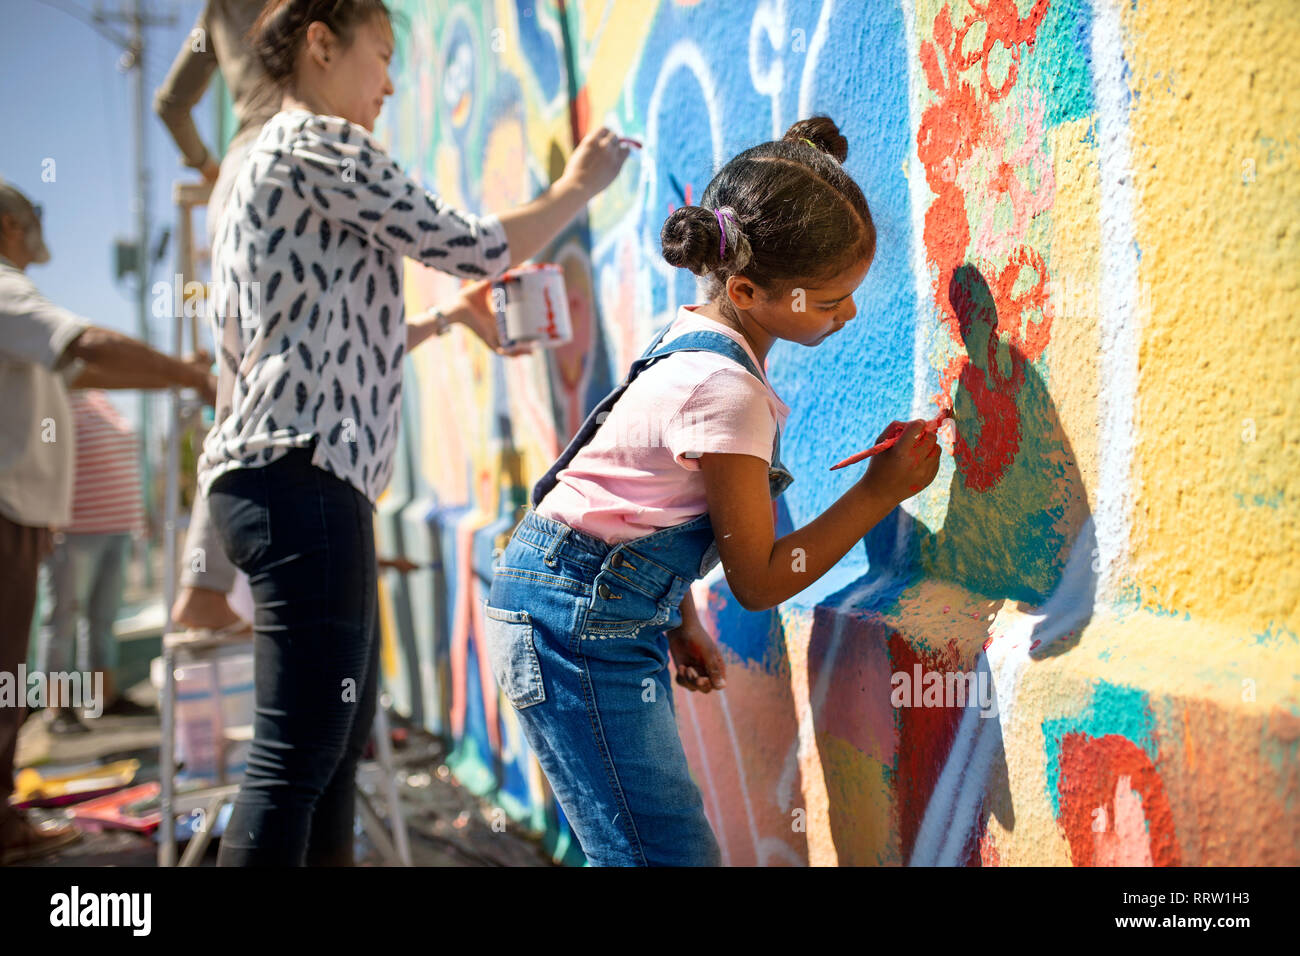 Girl volunteer painting vibrant mural on sunny wall Stock Photo